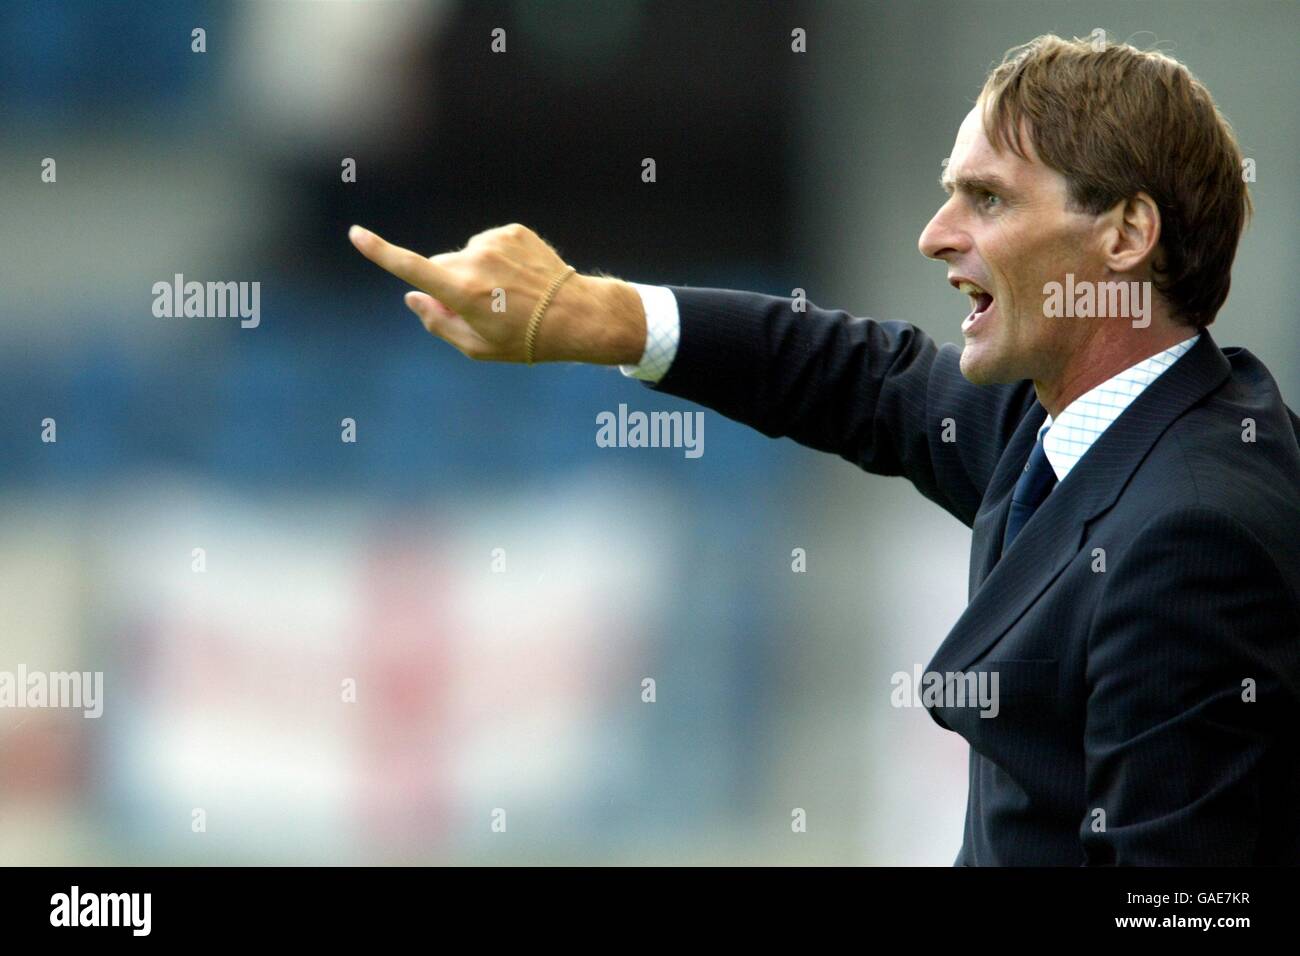 Soccer - Friendly - KAA Gent v Sunderland. KAA Gent Coach Jan Olde Riekerink directs his team from the sideline Stock Photo